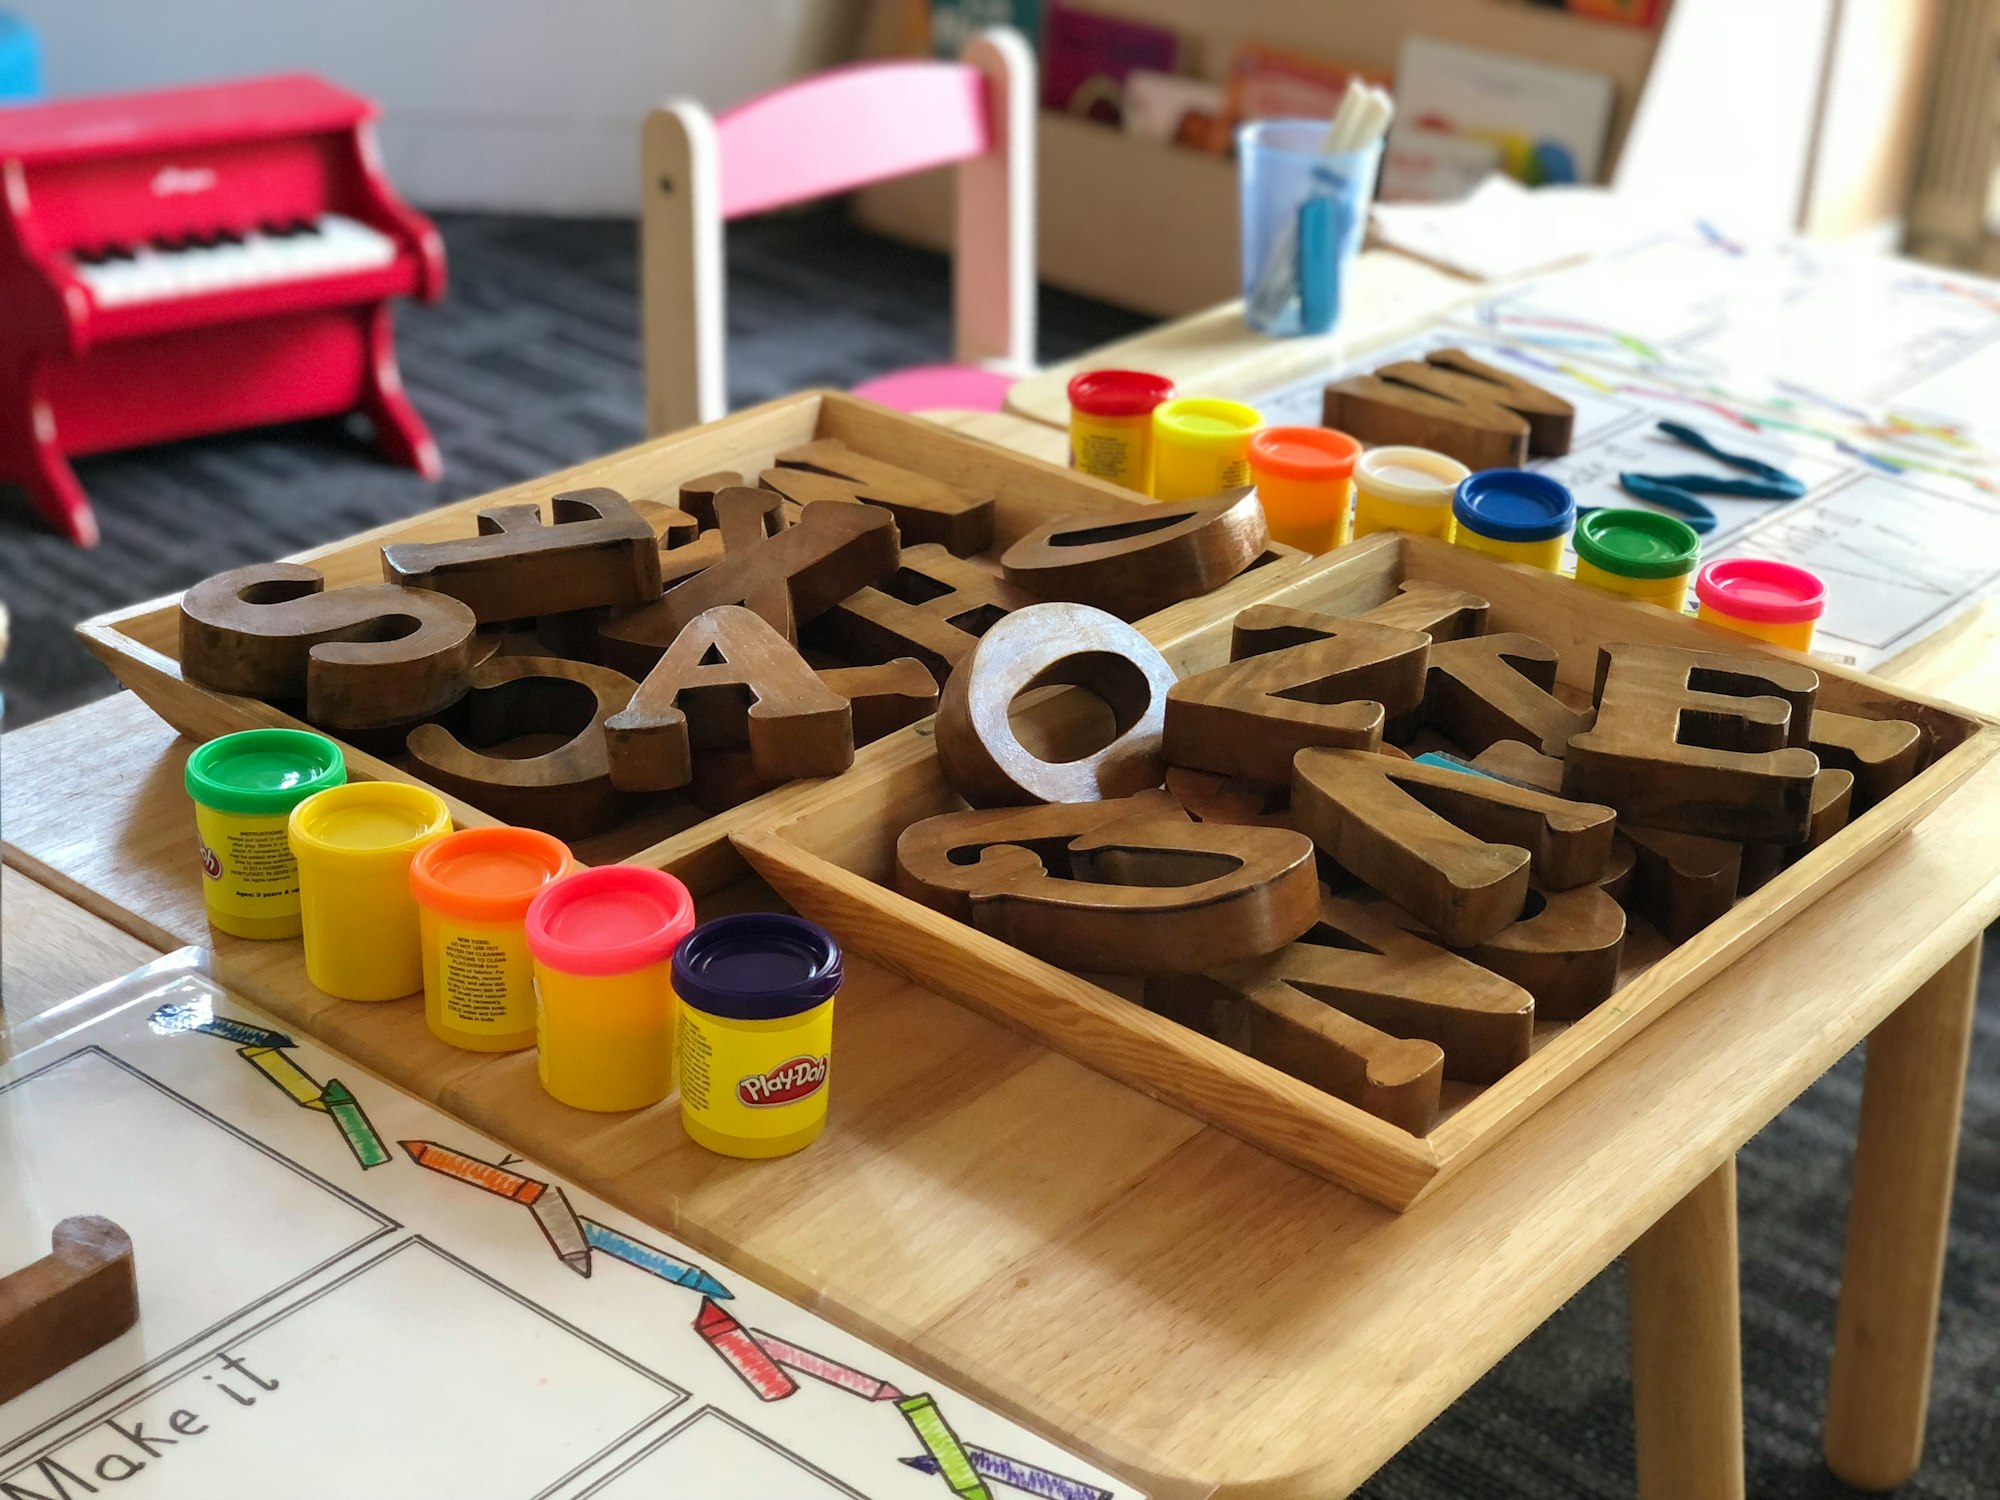 10 Specific Ideas To Gamify Your Classroom